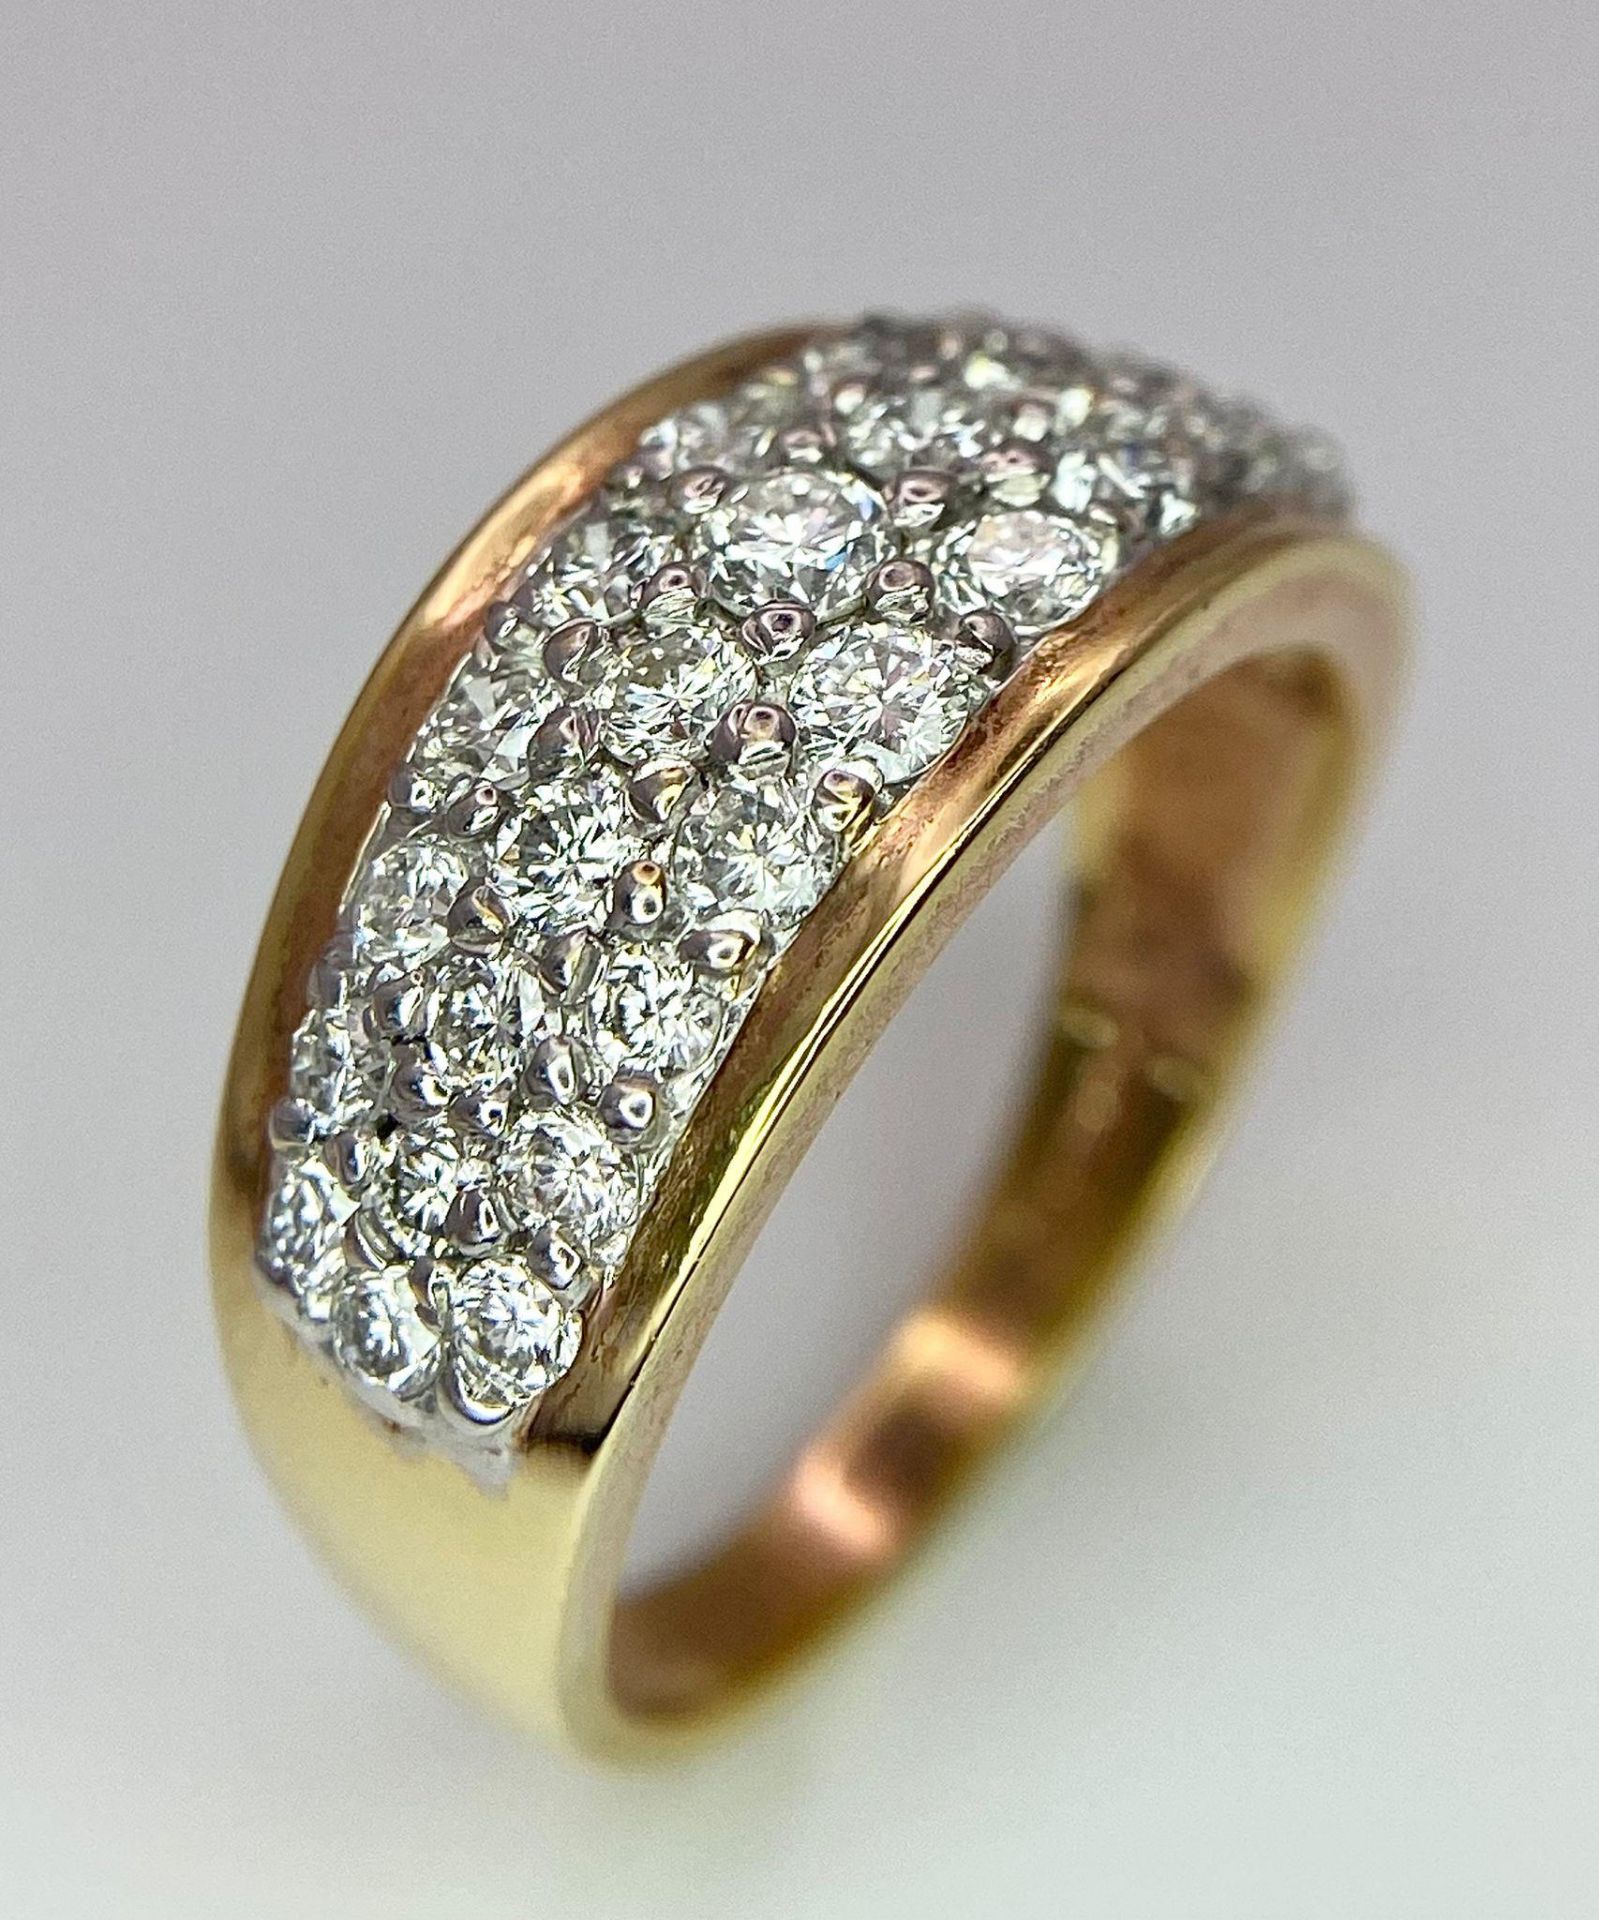 An 18K Yellow Gold Three-Row Cluster Ring. 1ctw. Size M. 5.5g total weight. - Image 3 of 15